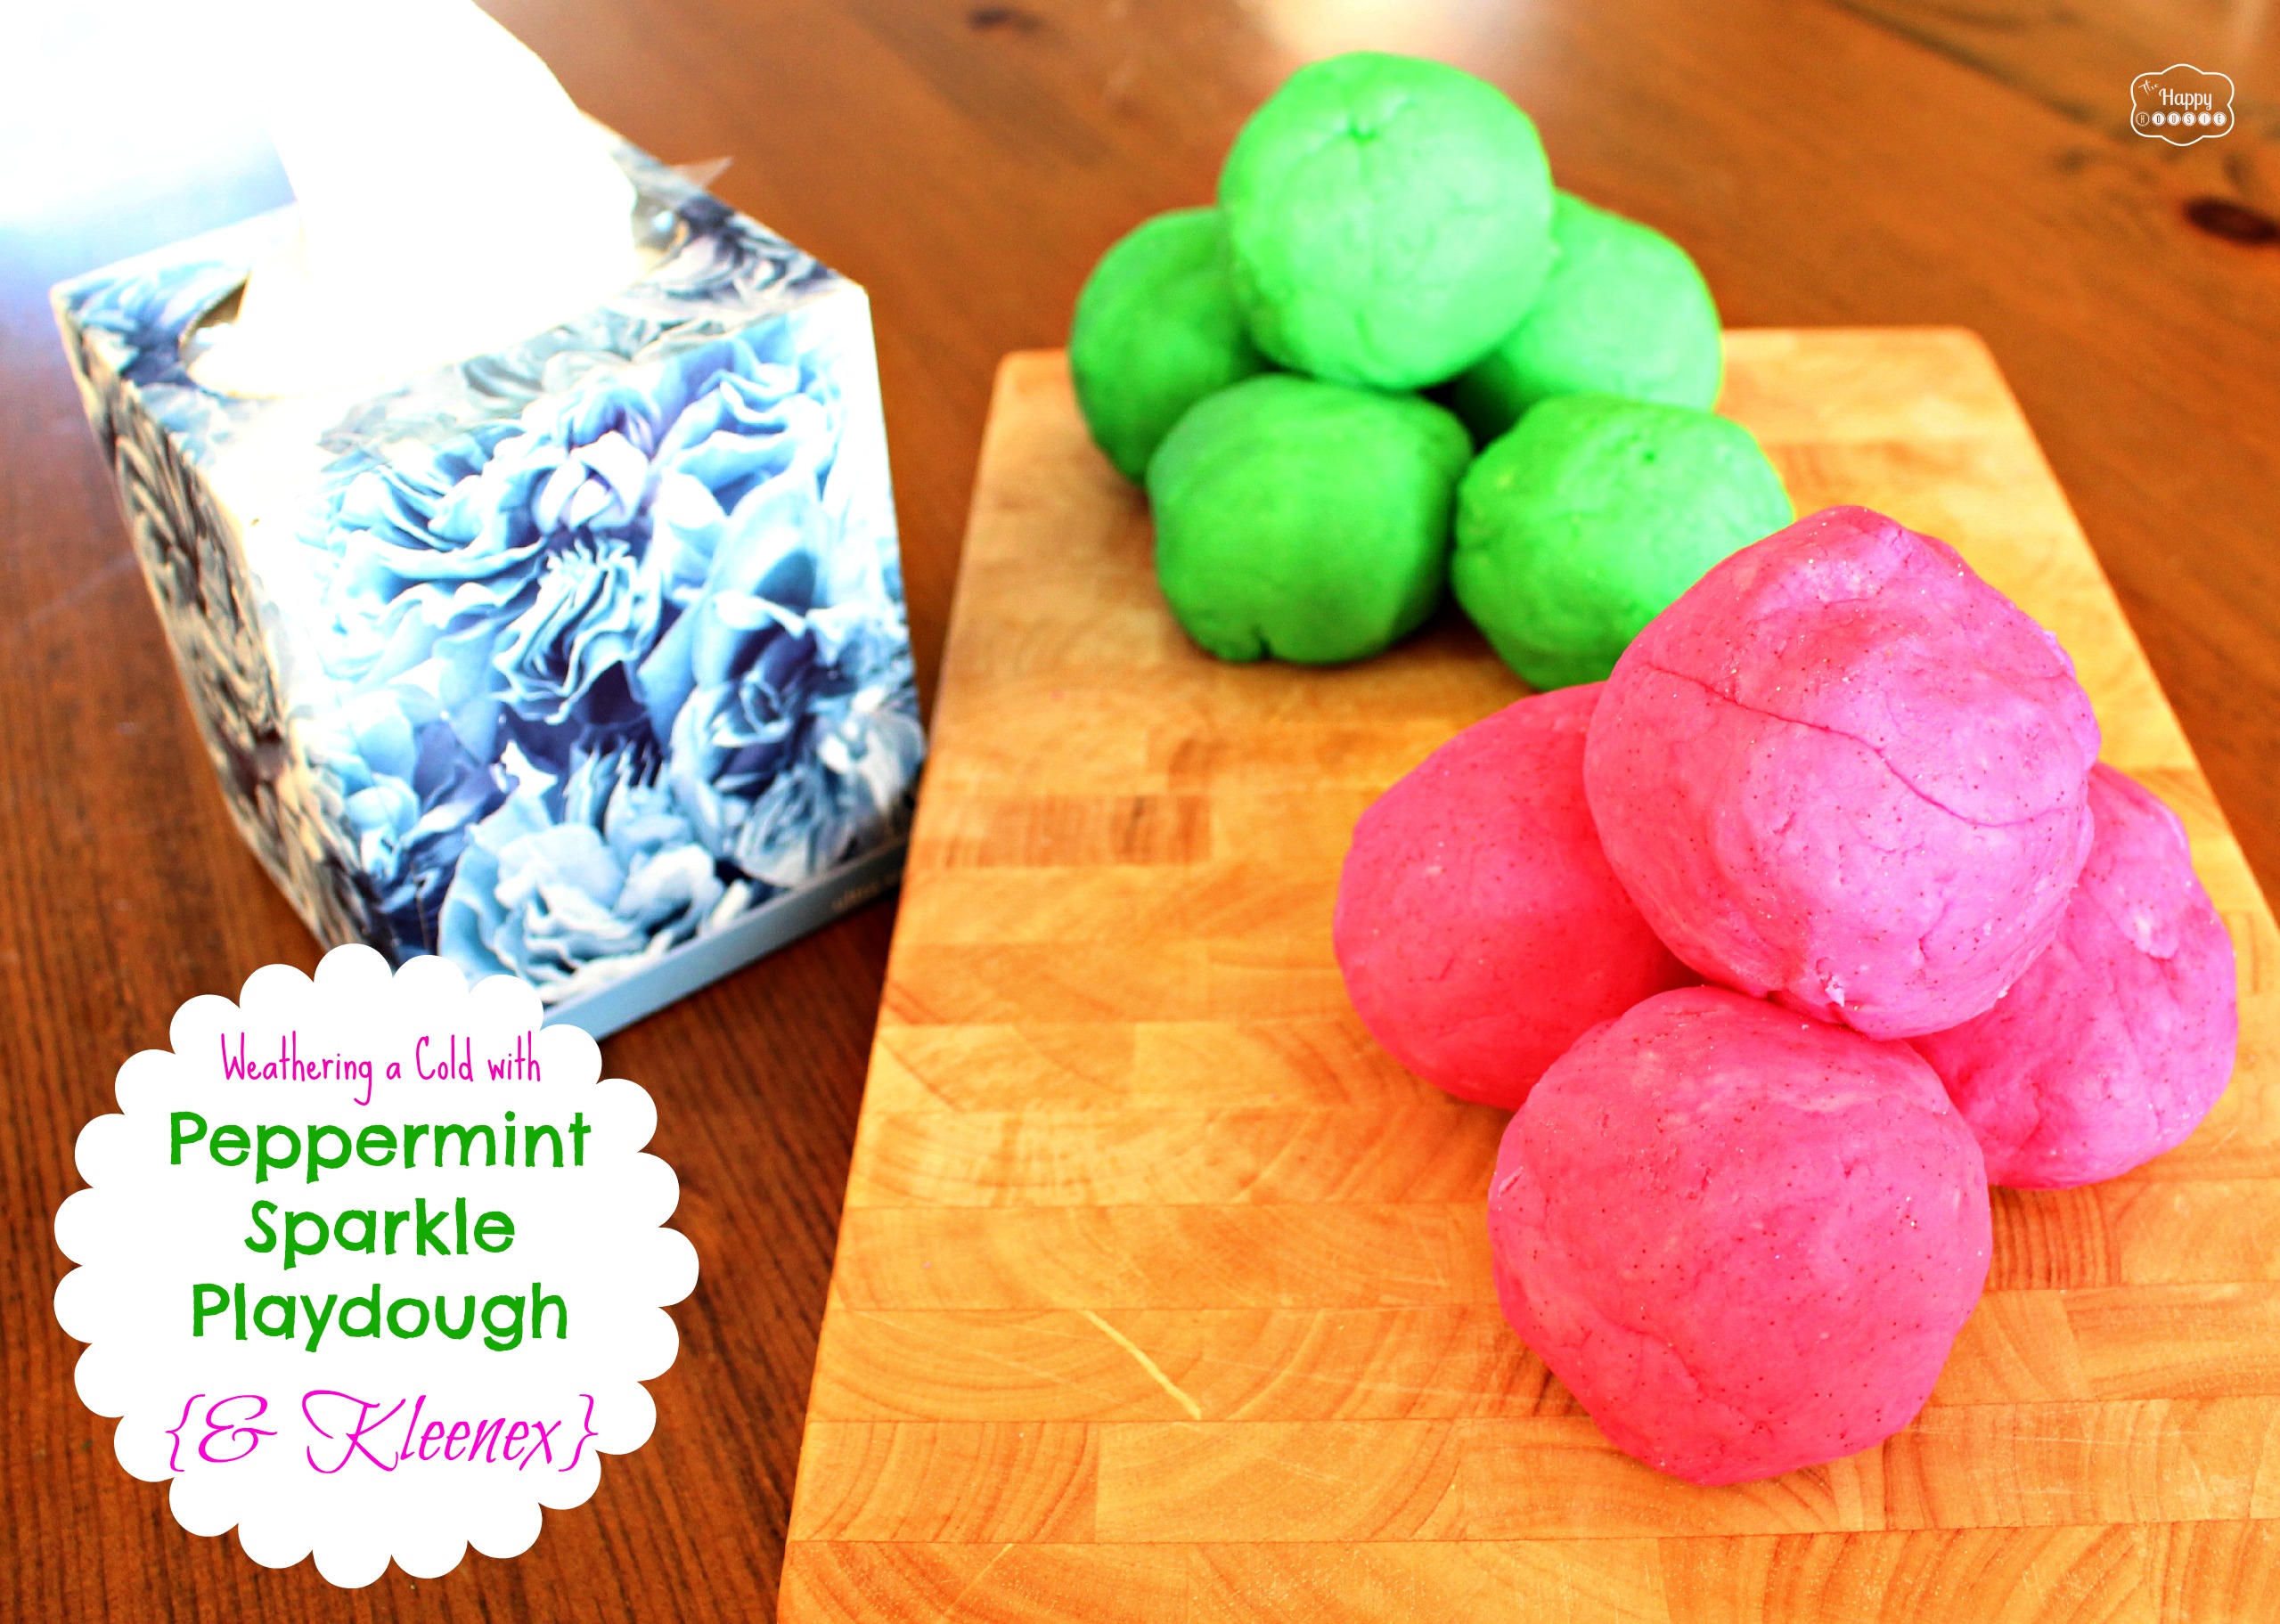 Peppermint Sparkle Playdough {and Kleenex} for Weathering a Sick Day